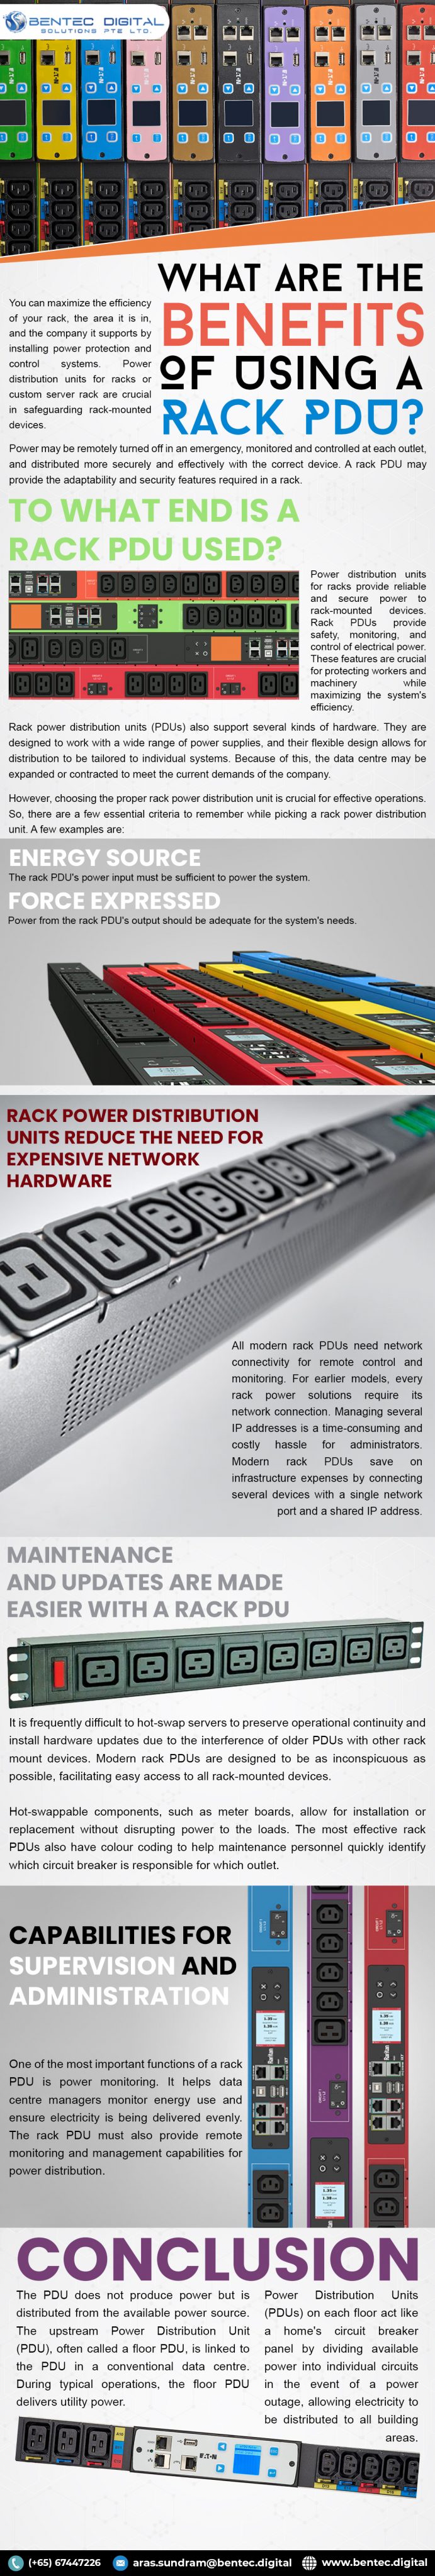 What Are The Benefits Of Using A Rack PDU?